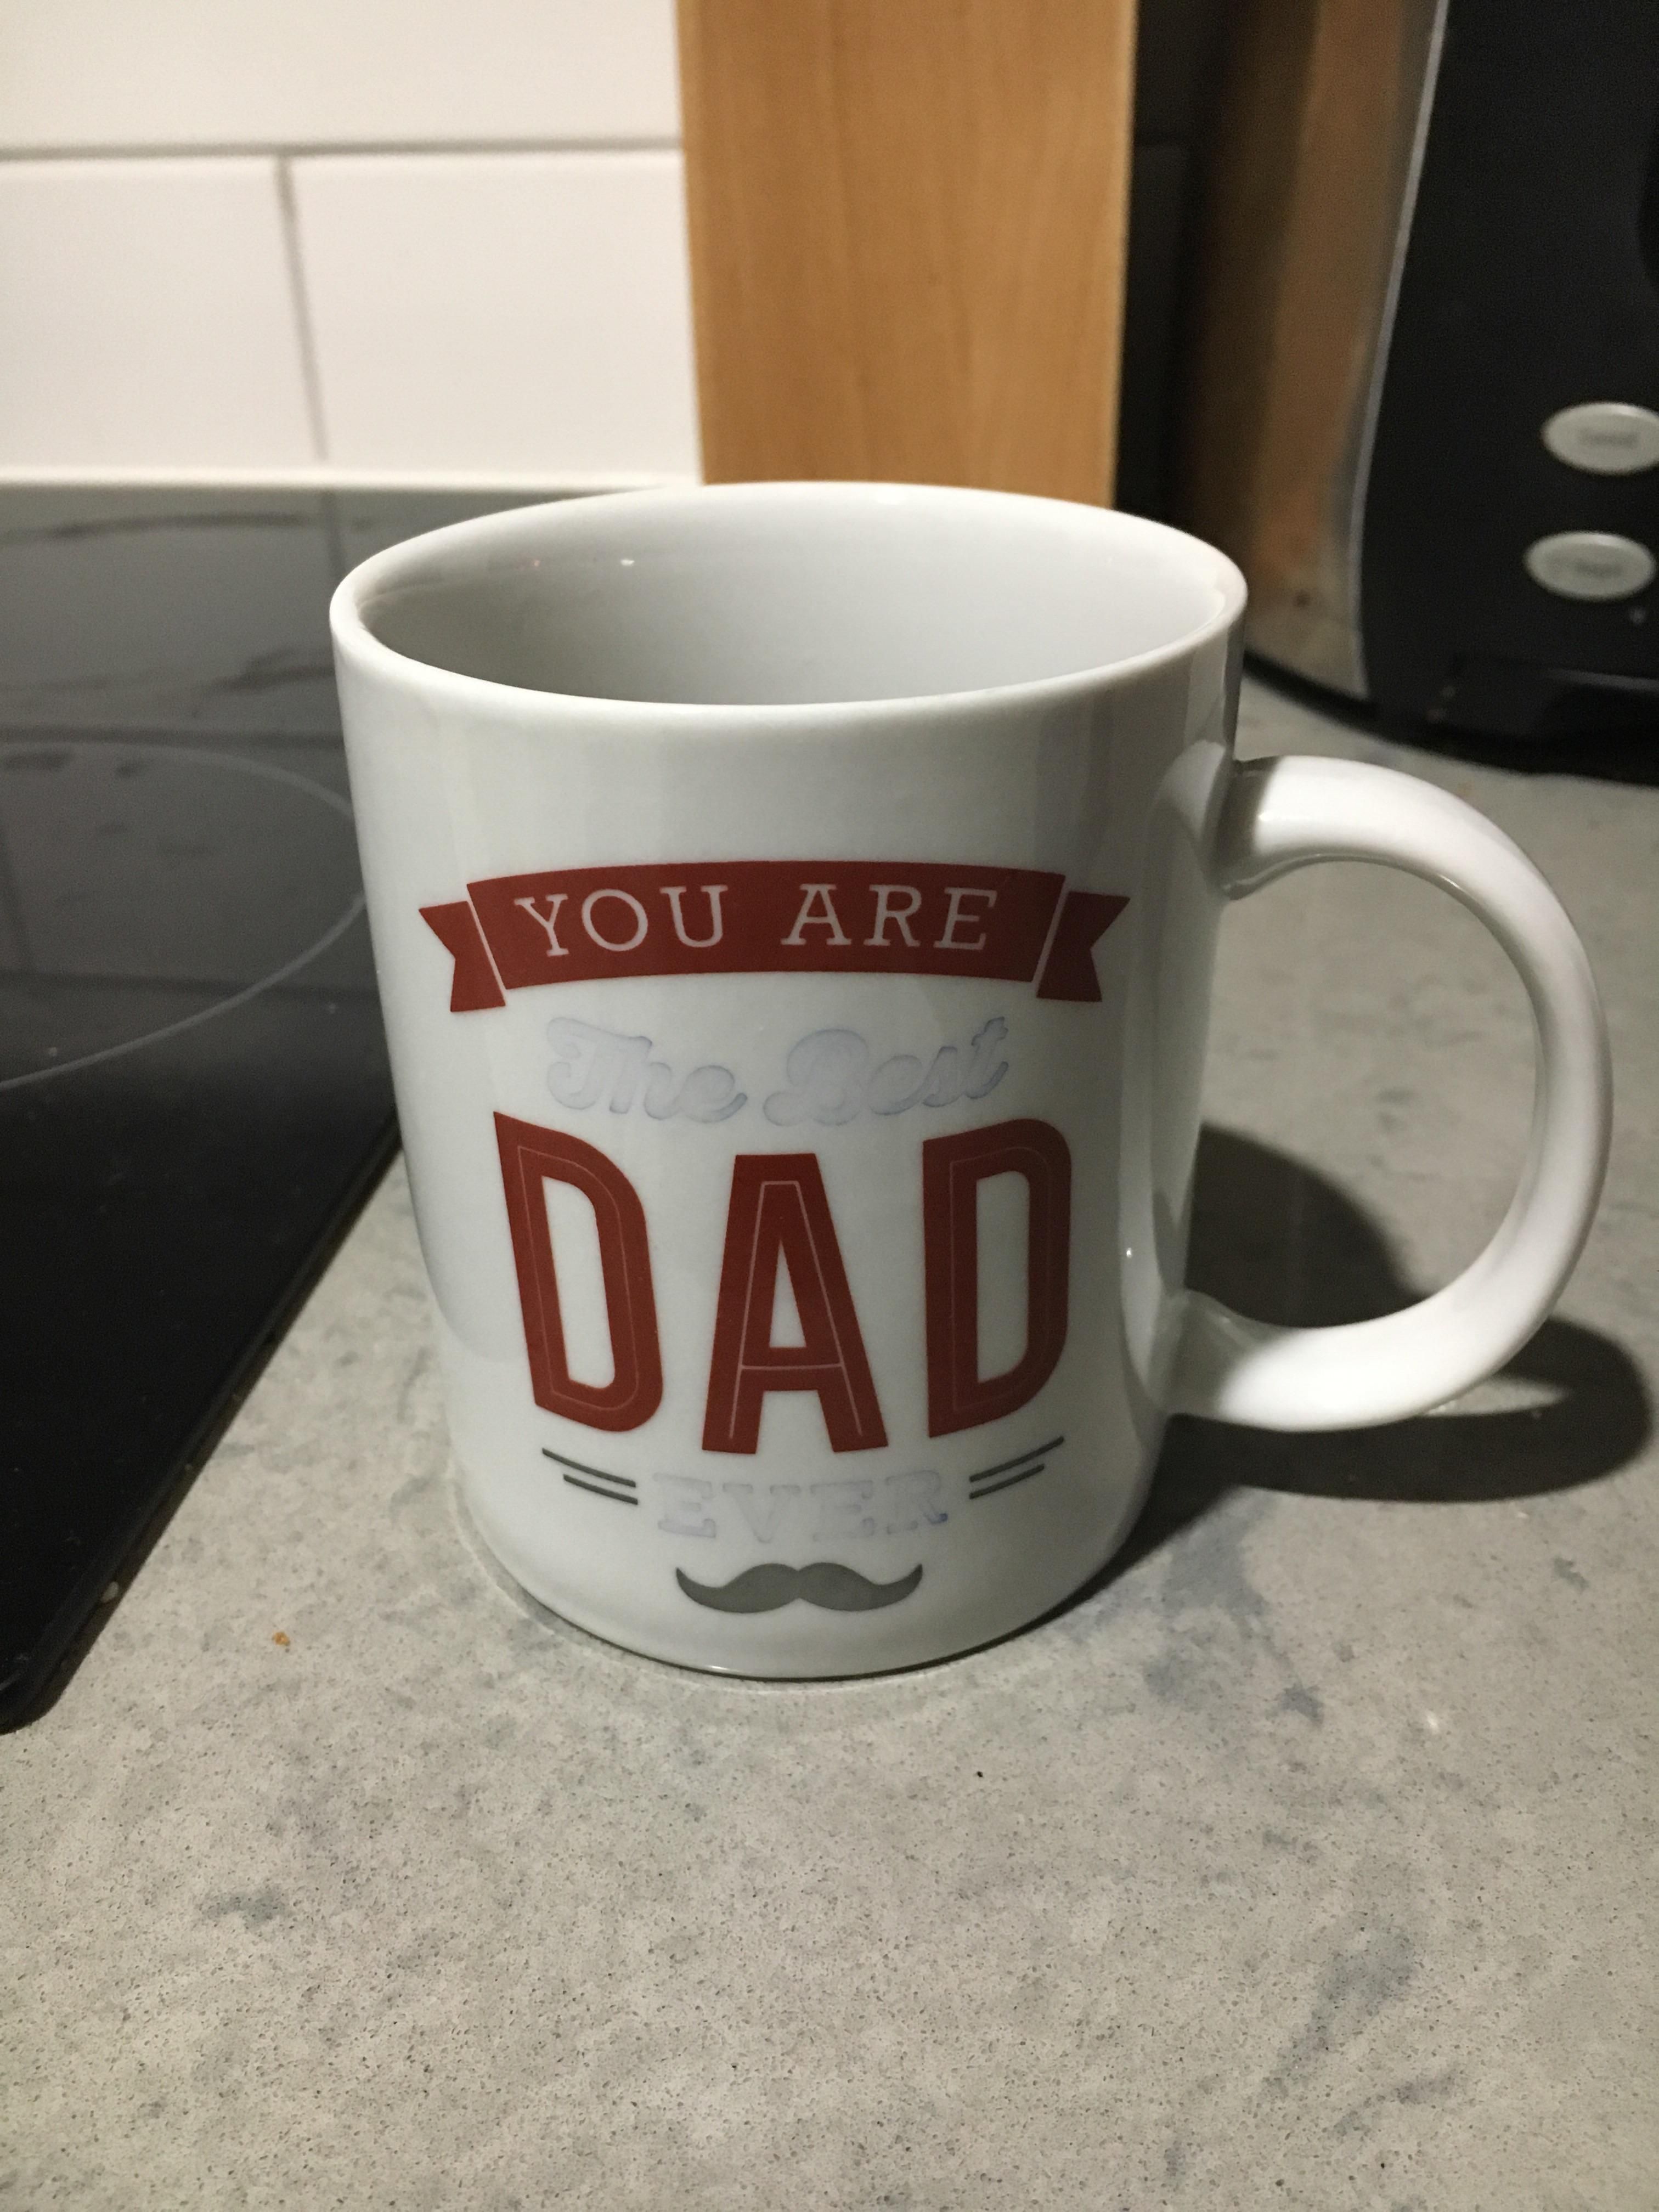 My mugs starting to fade, now I’m just Dad..